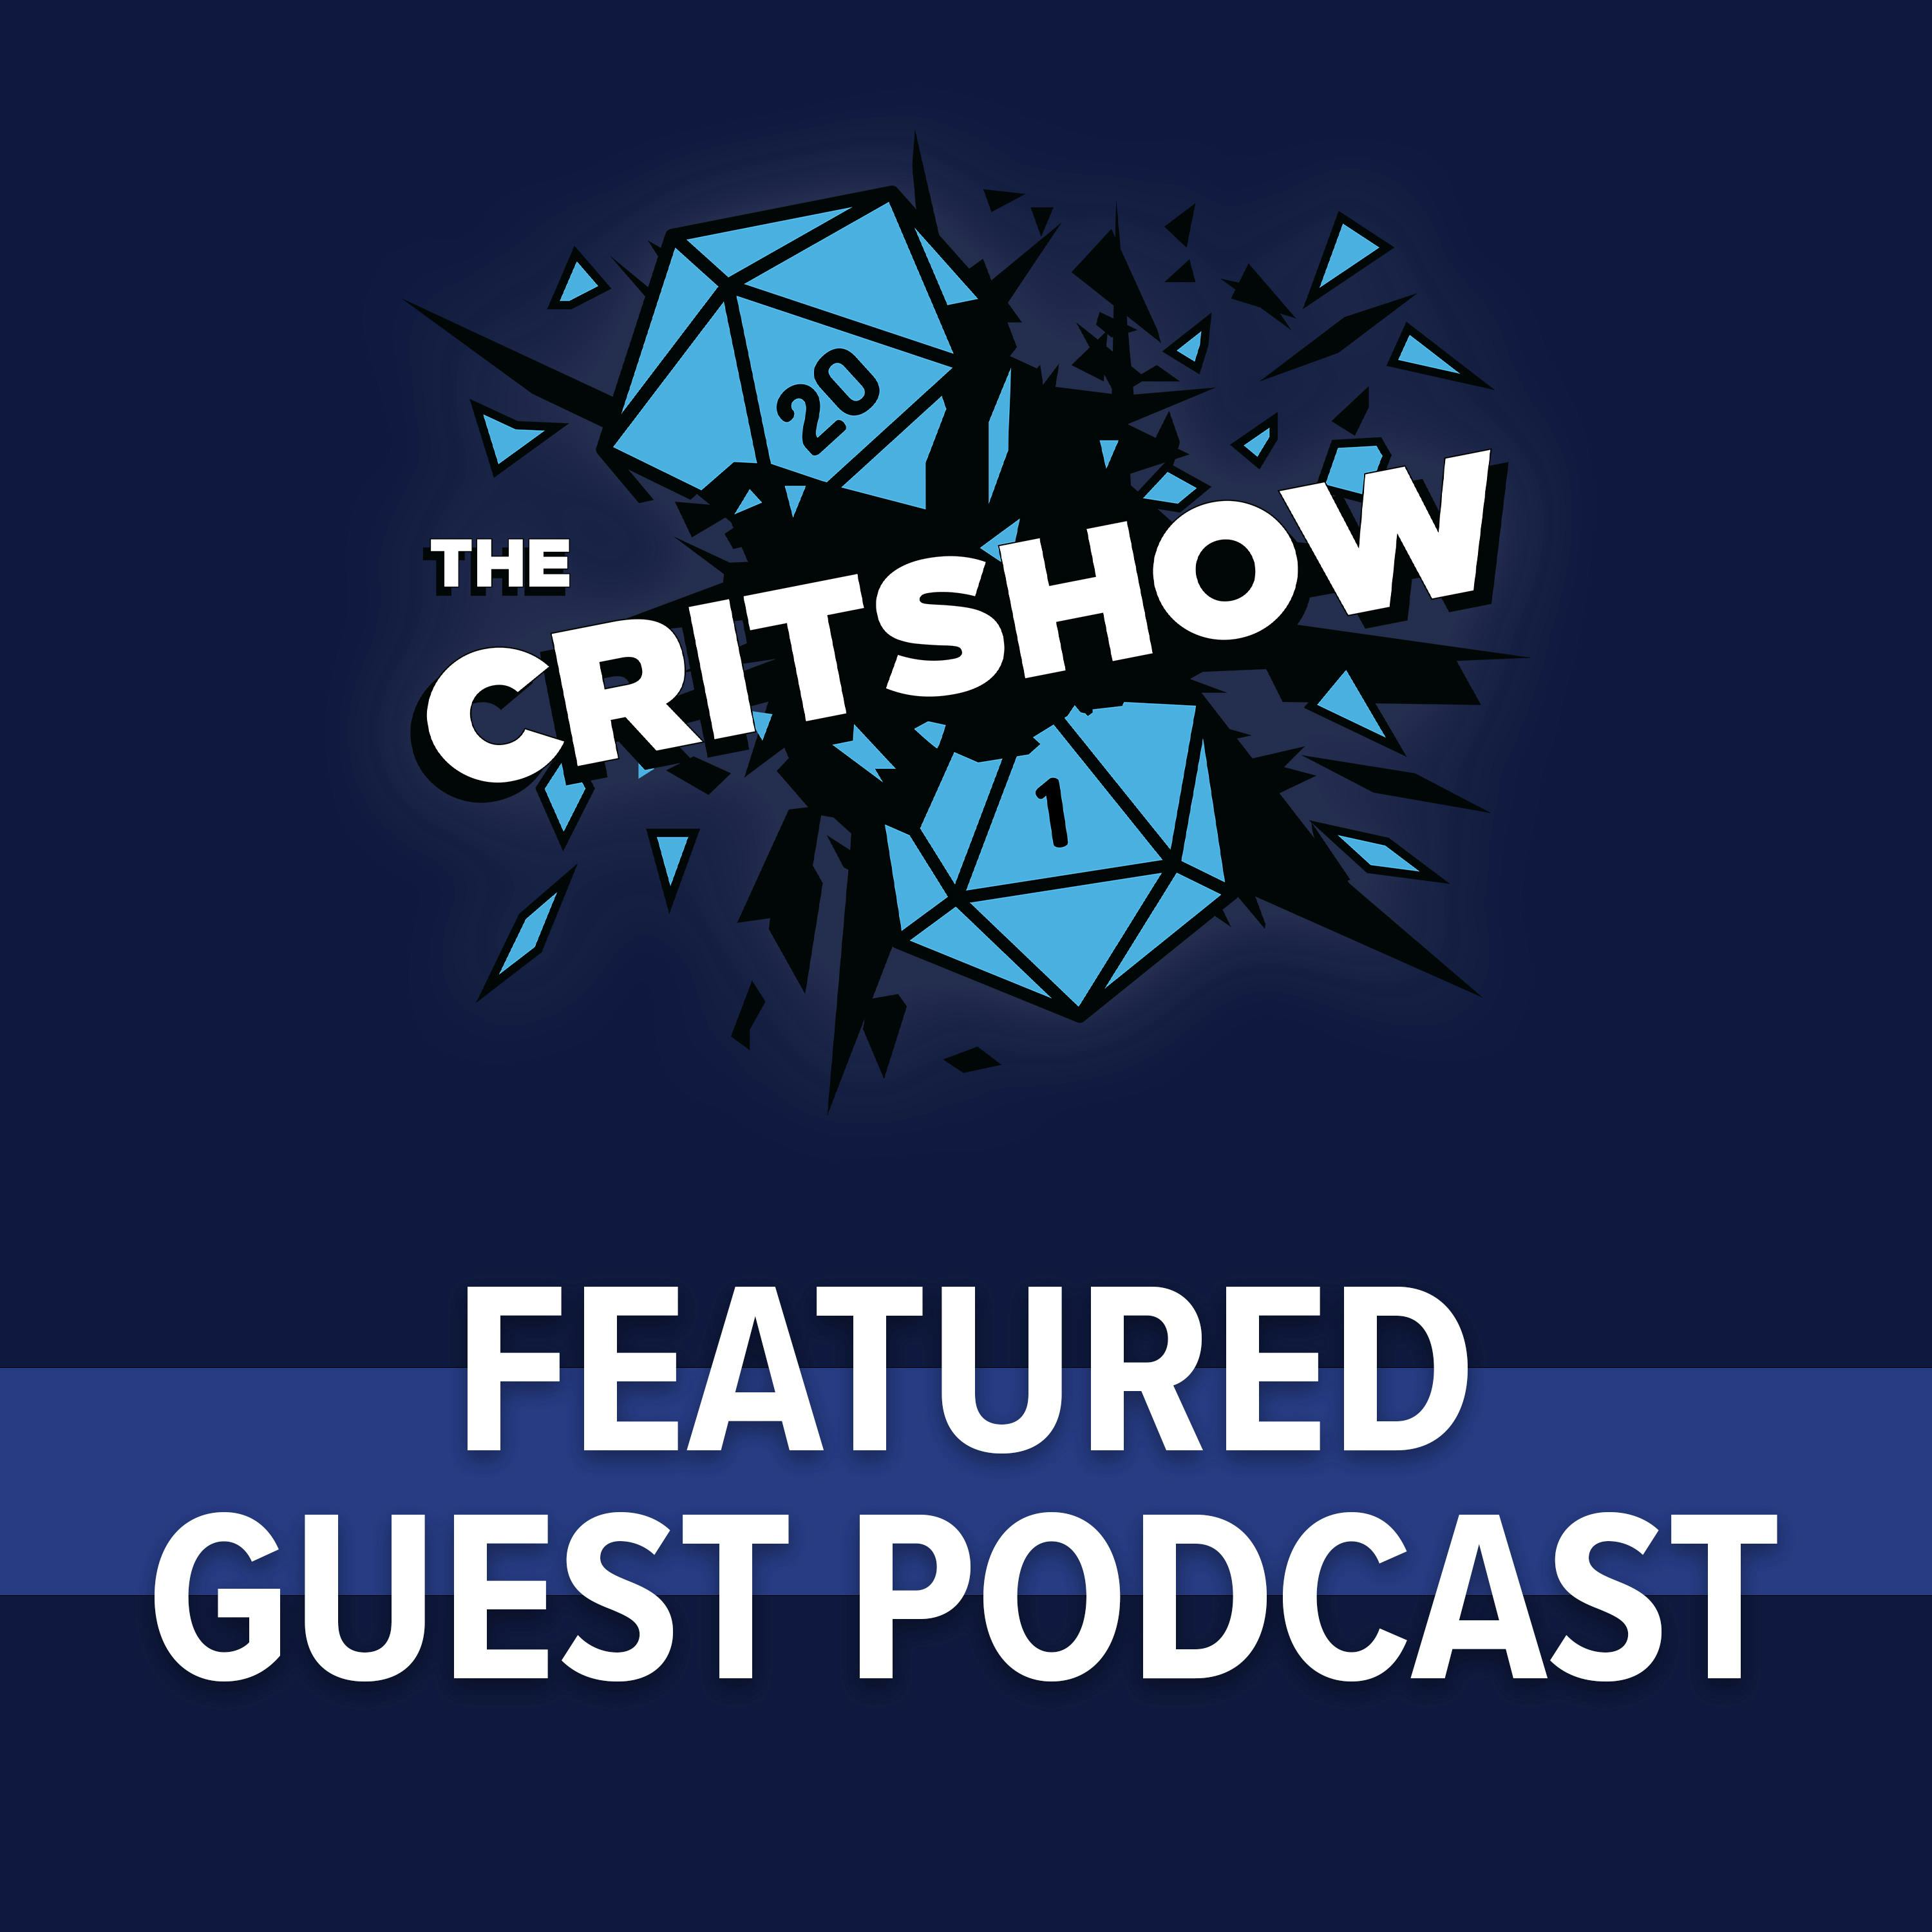 The Critshow: Dumbgeons and Dragons